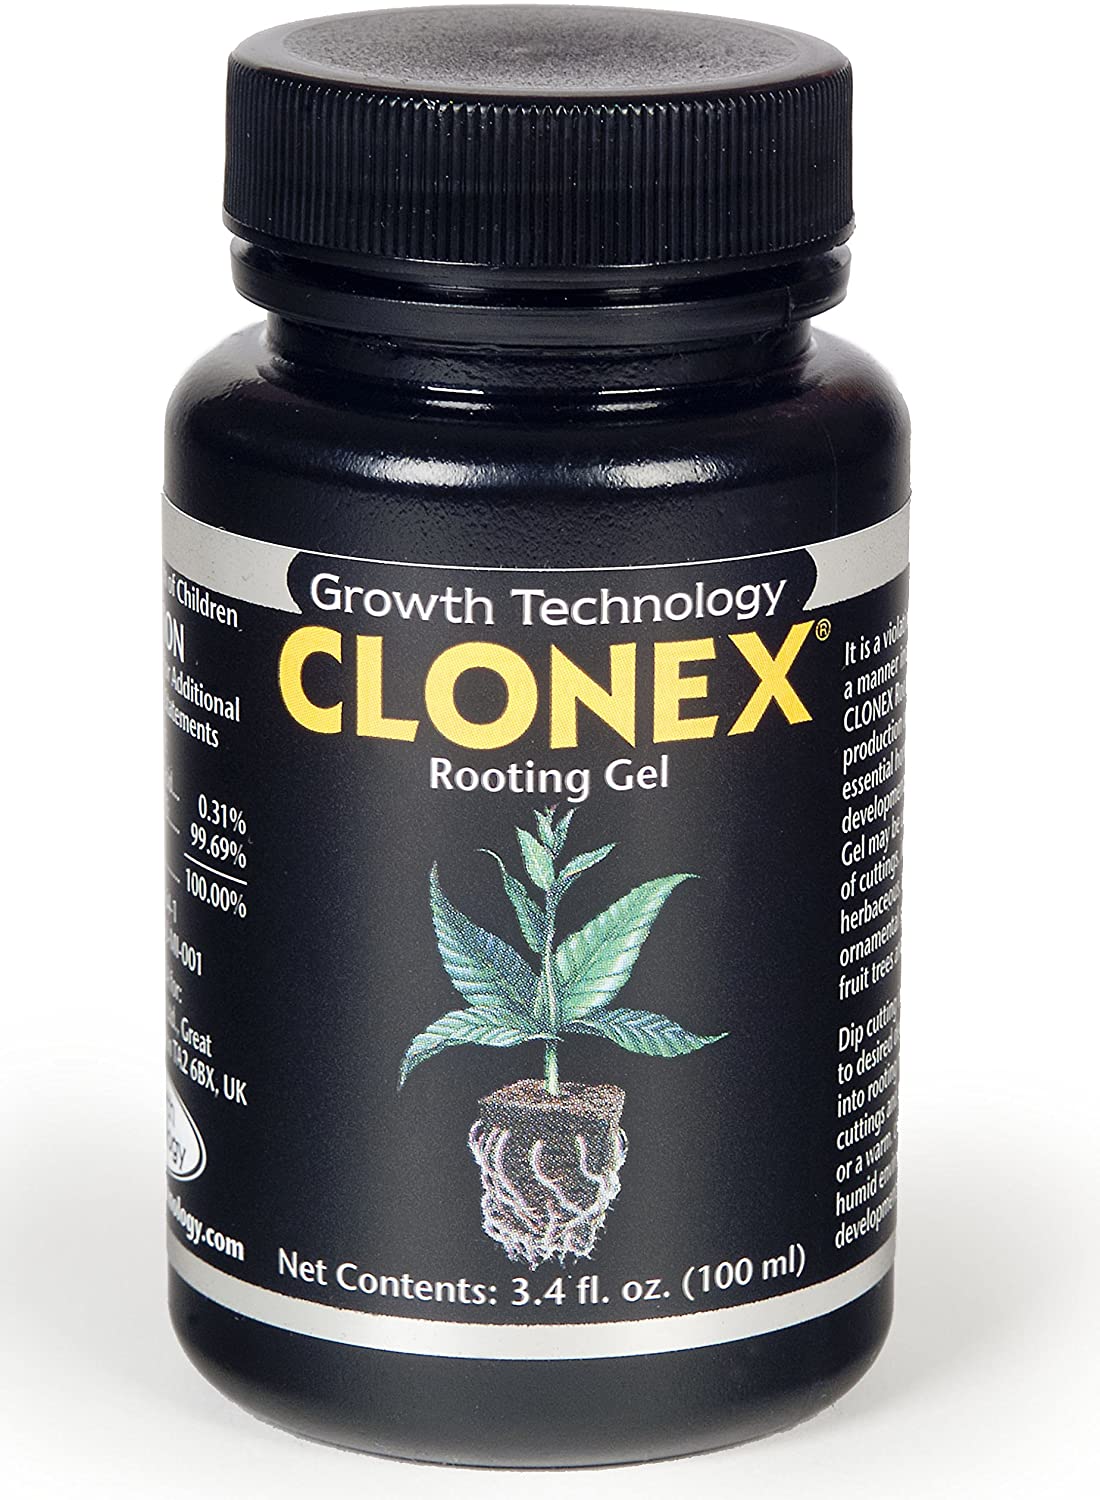 Clonex Line of Products